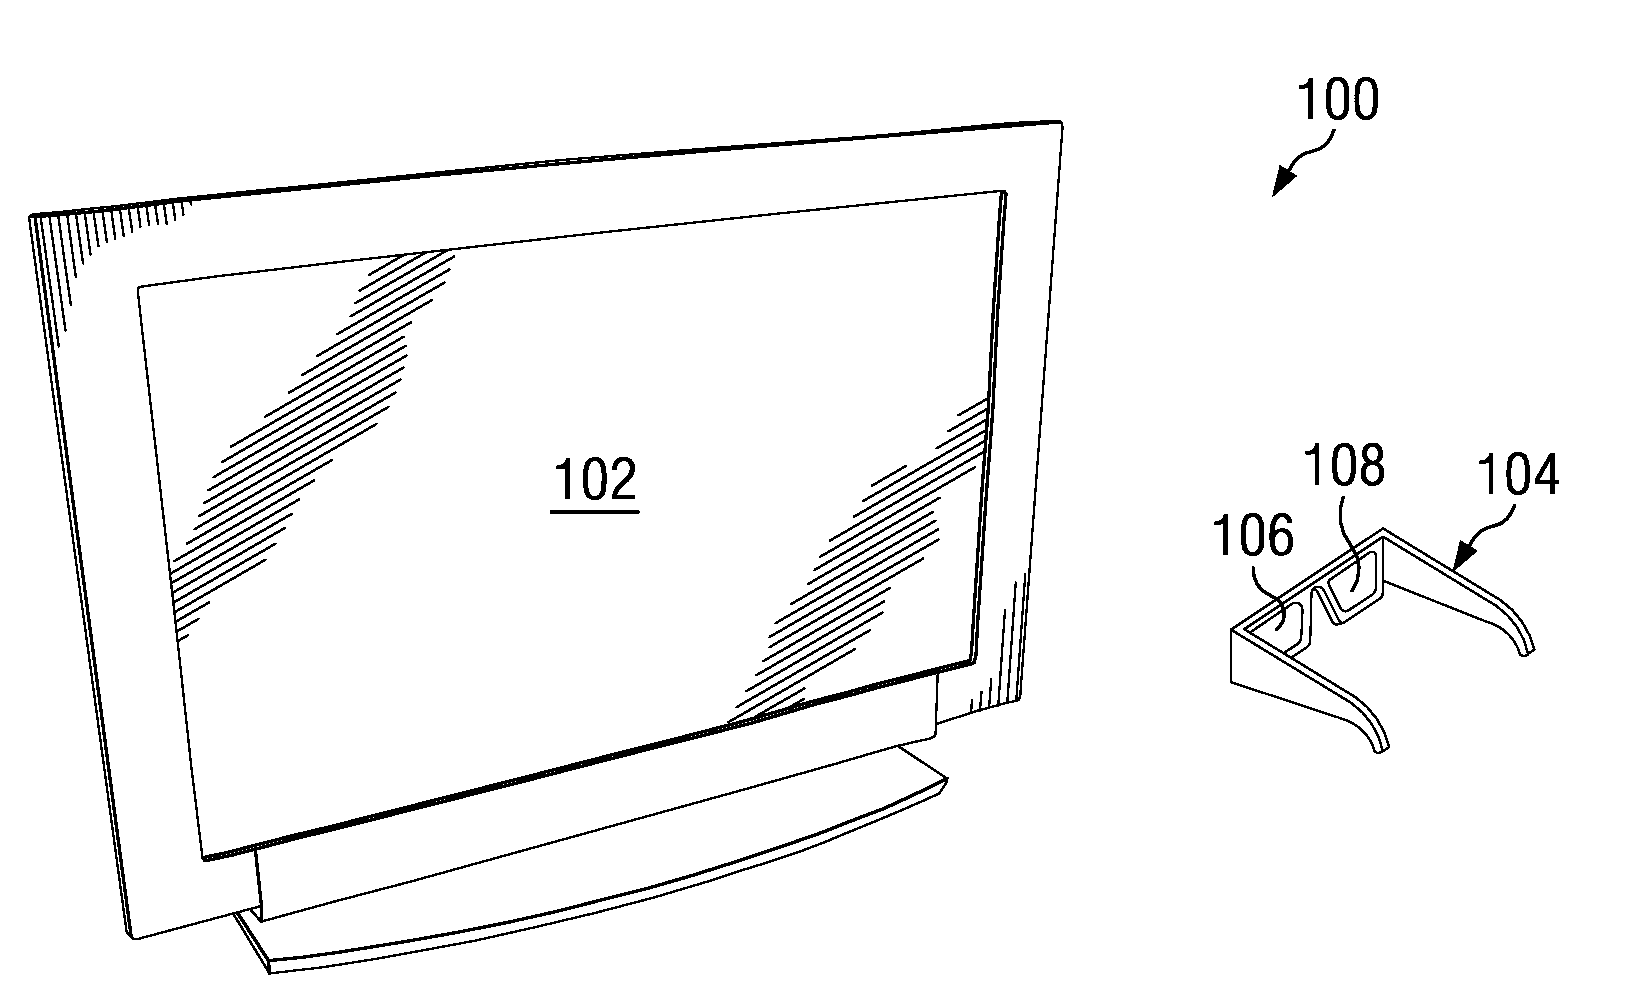 Shutter glass drive scheme for sequential-color displays